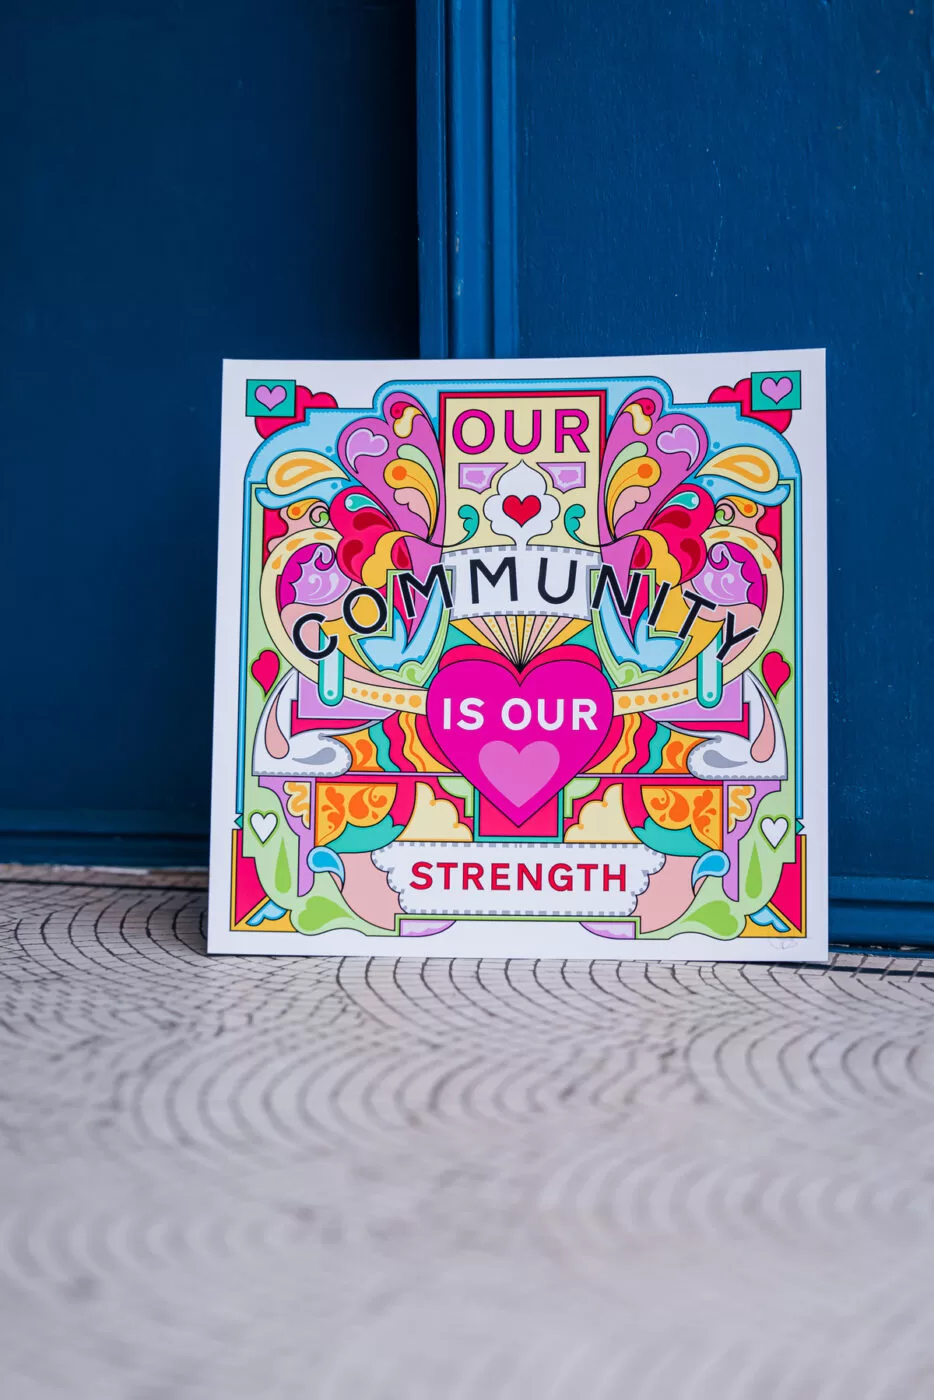 Our Community Is Our Strength Placard.